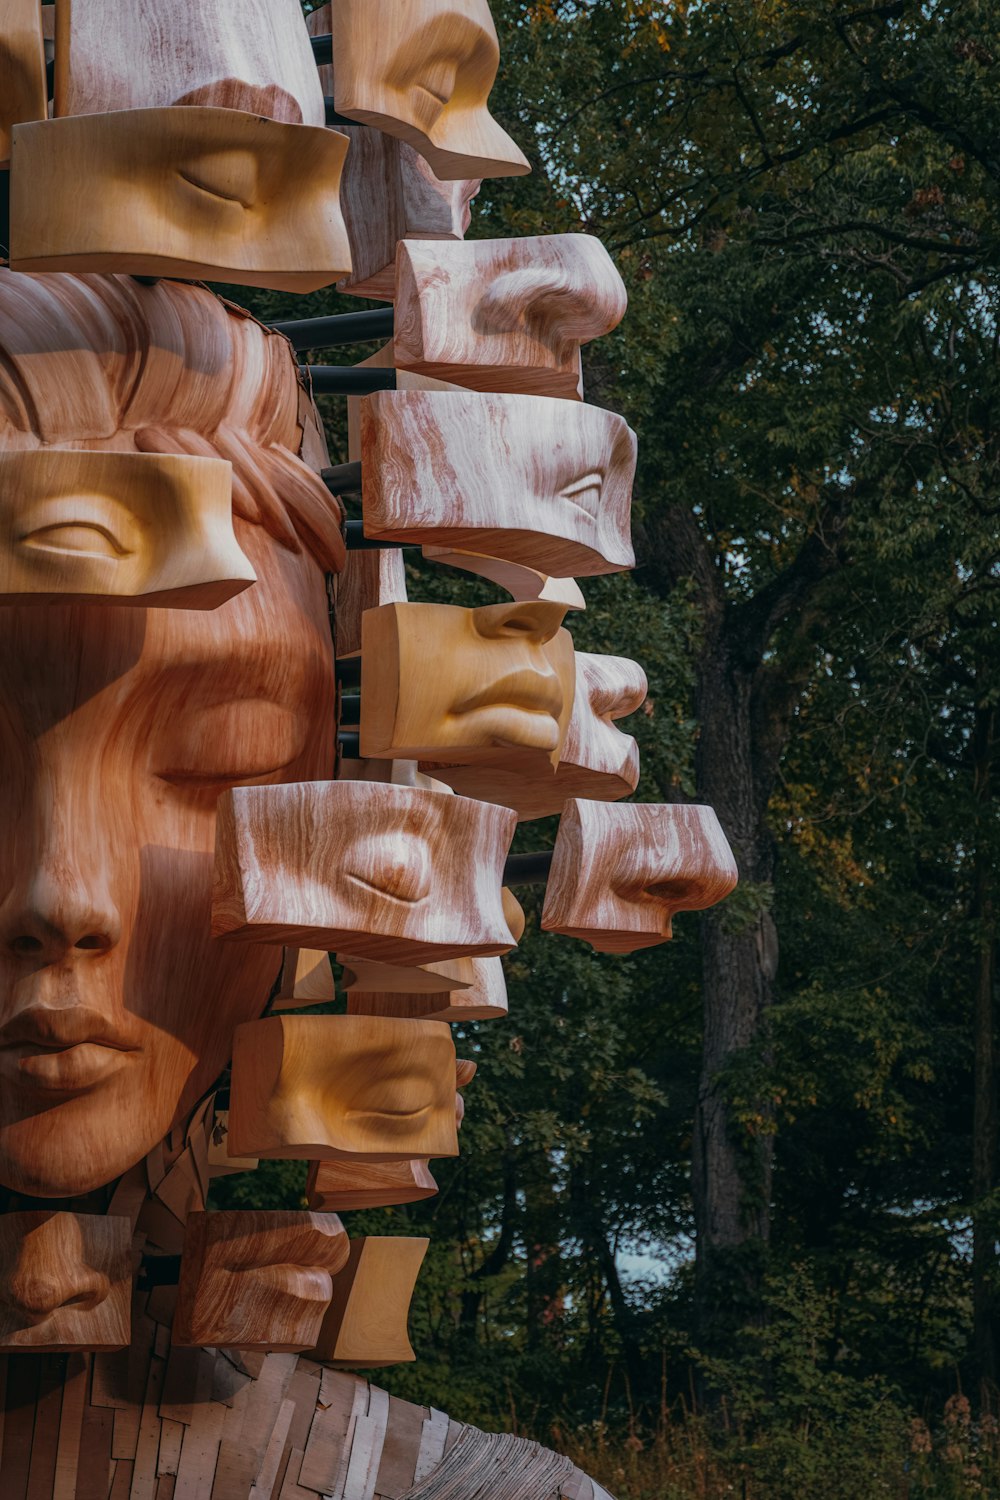 a sculpture made of wood with many faces on it